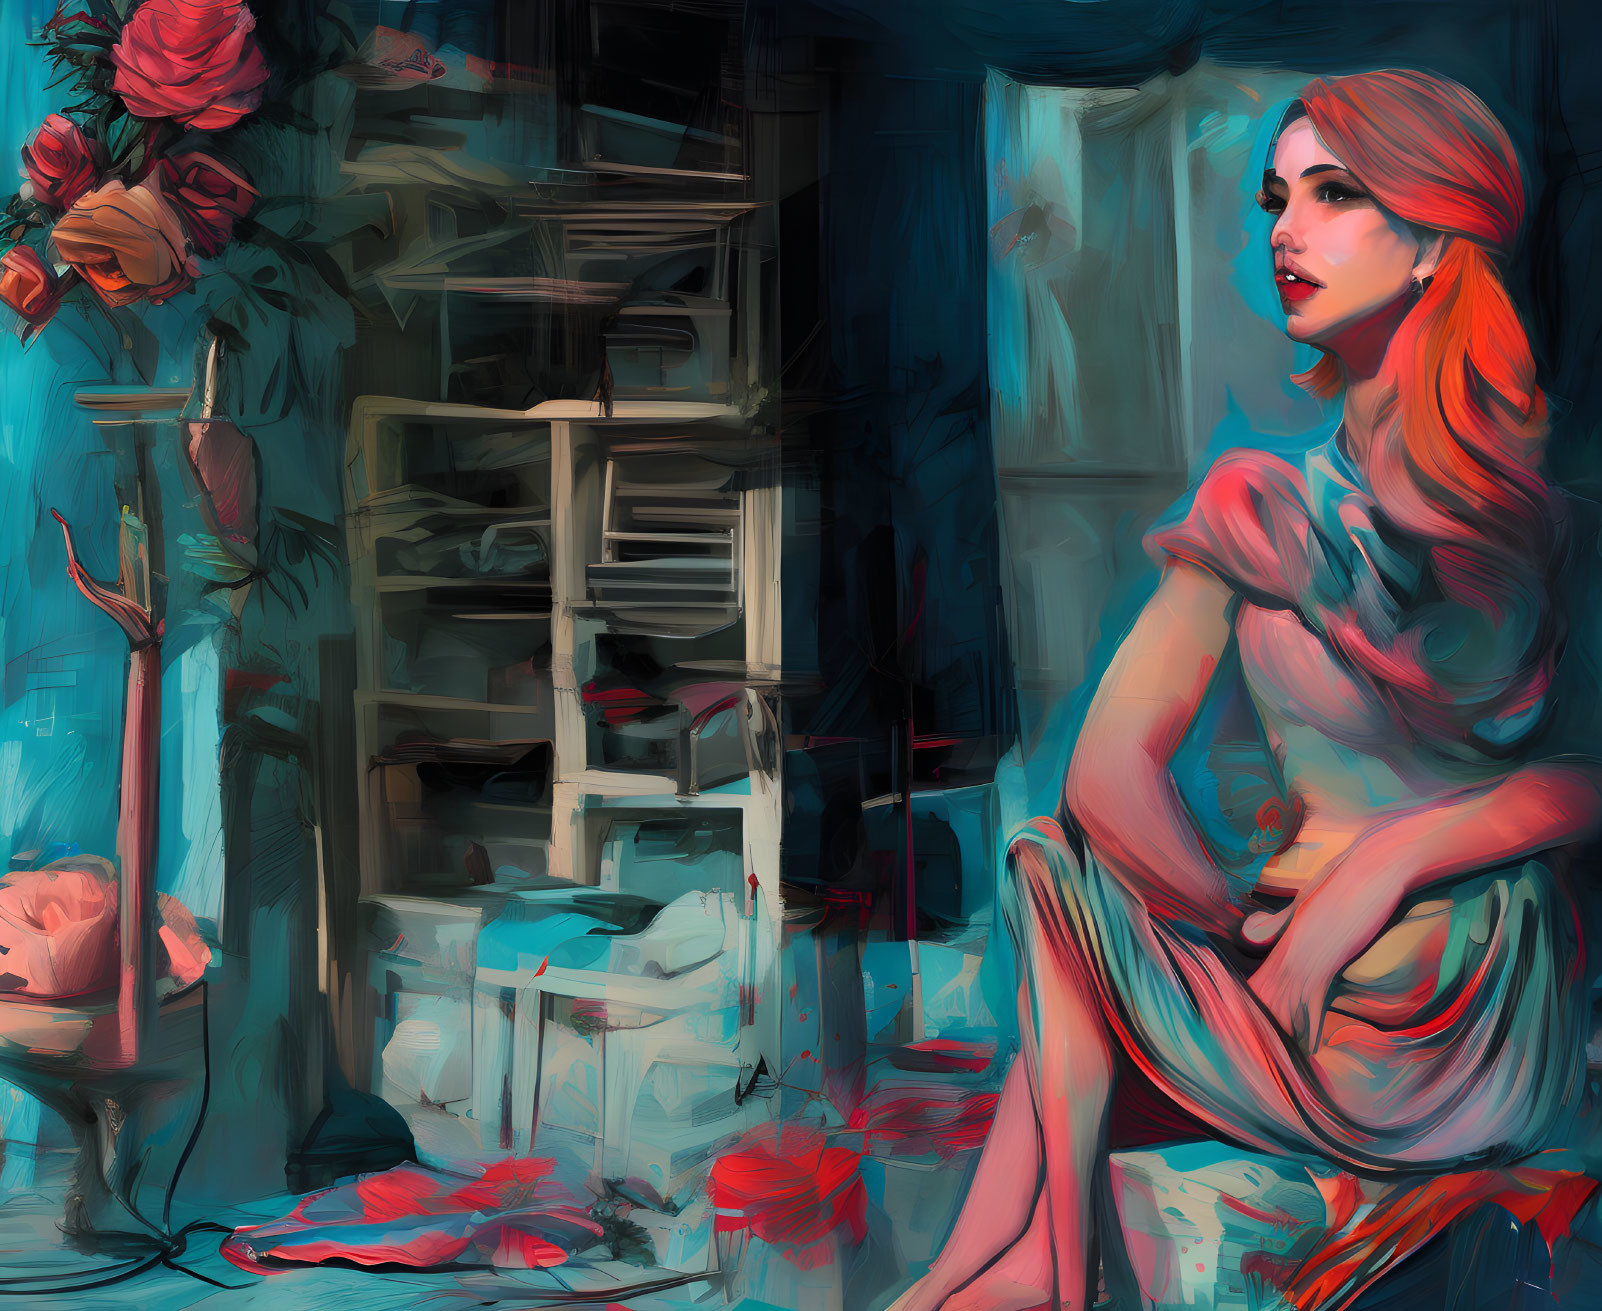 Stylized painting of woman with red accents in cluttered room